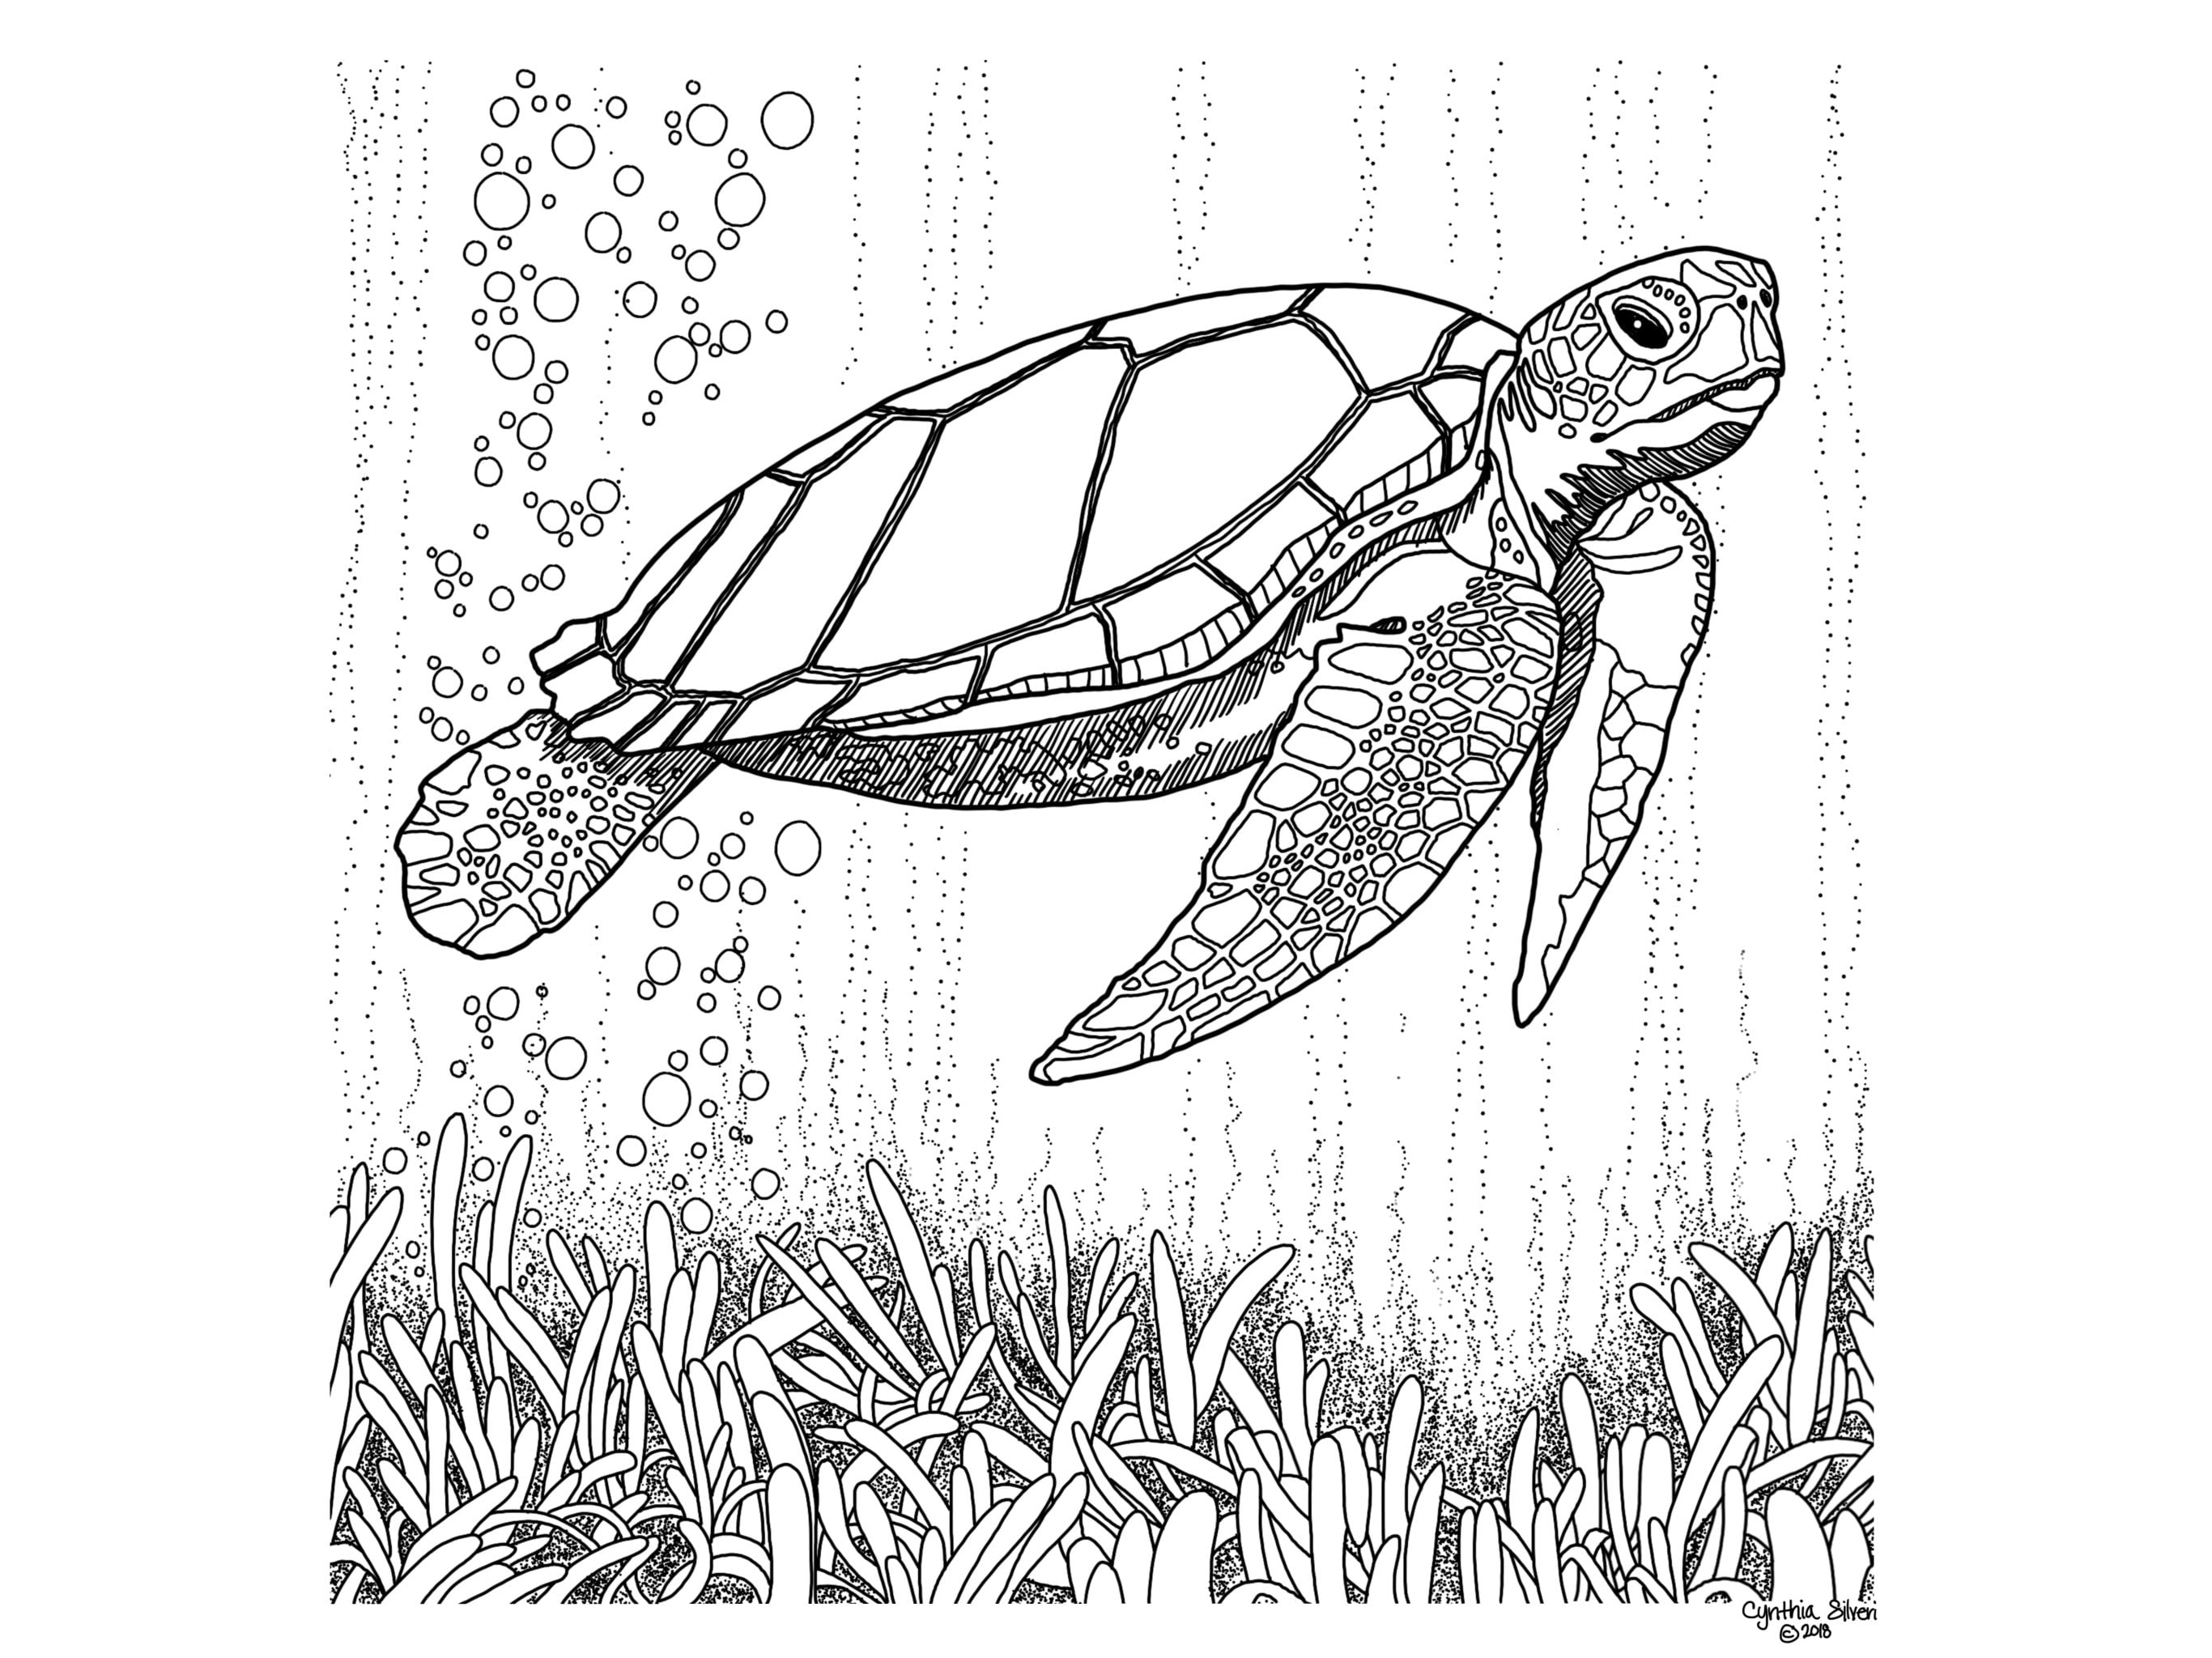 Printable sea turtle art illustration coloring page craft image collage